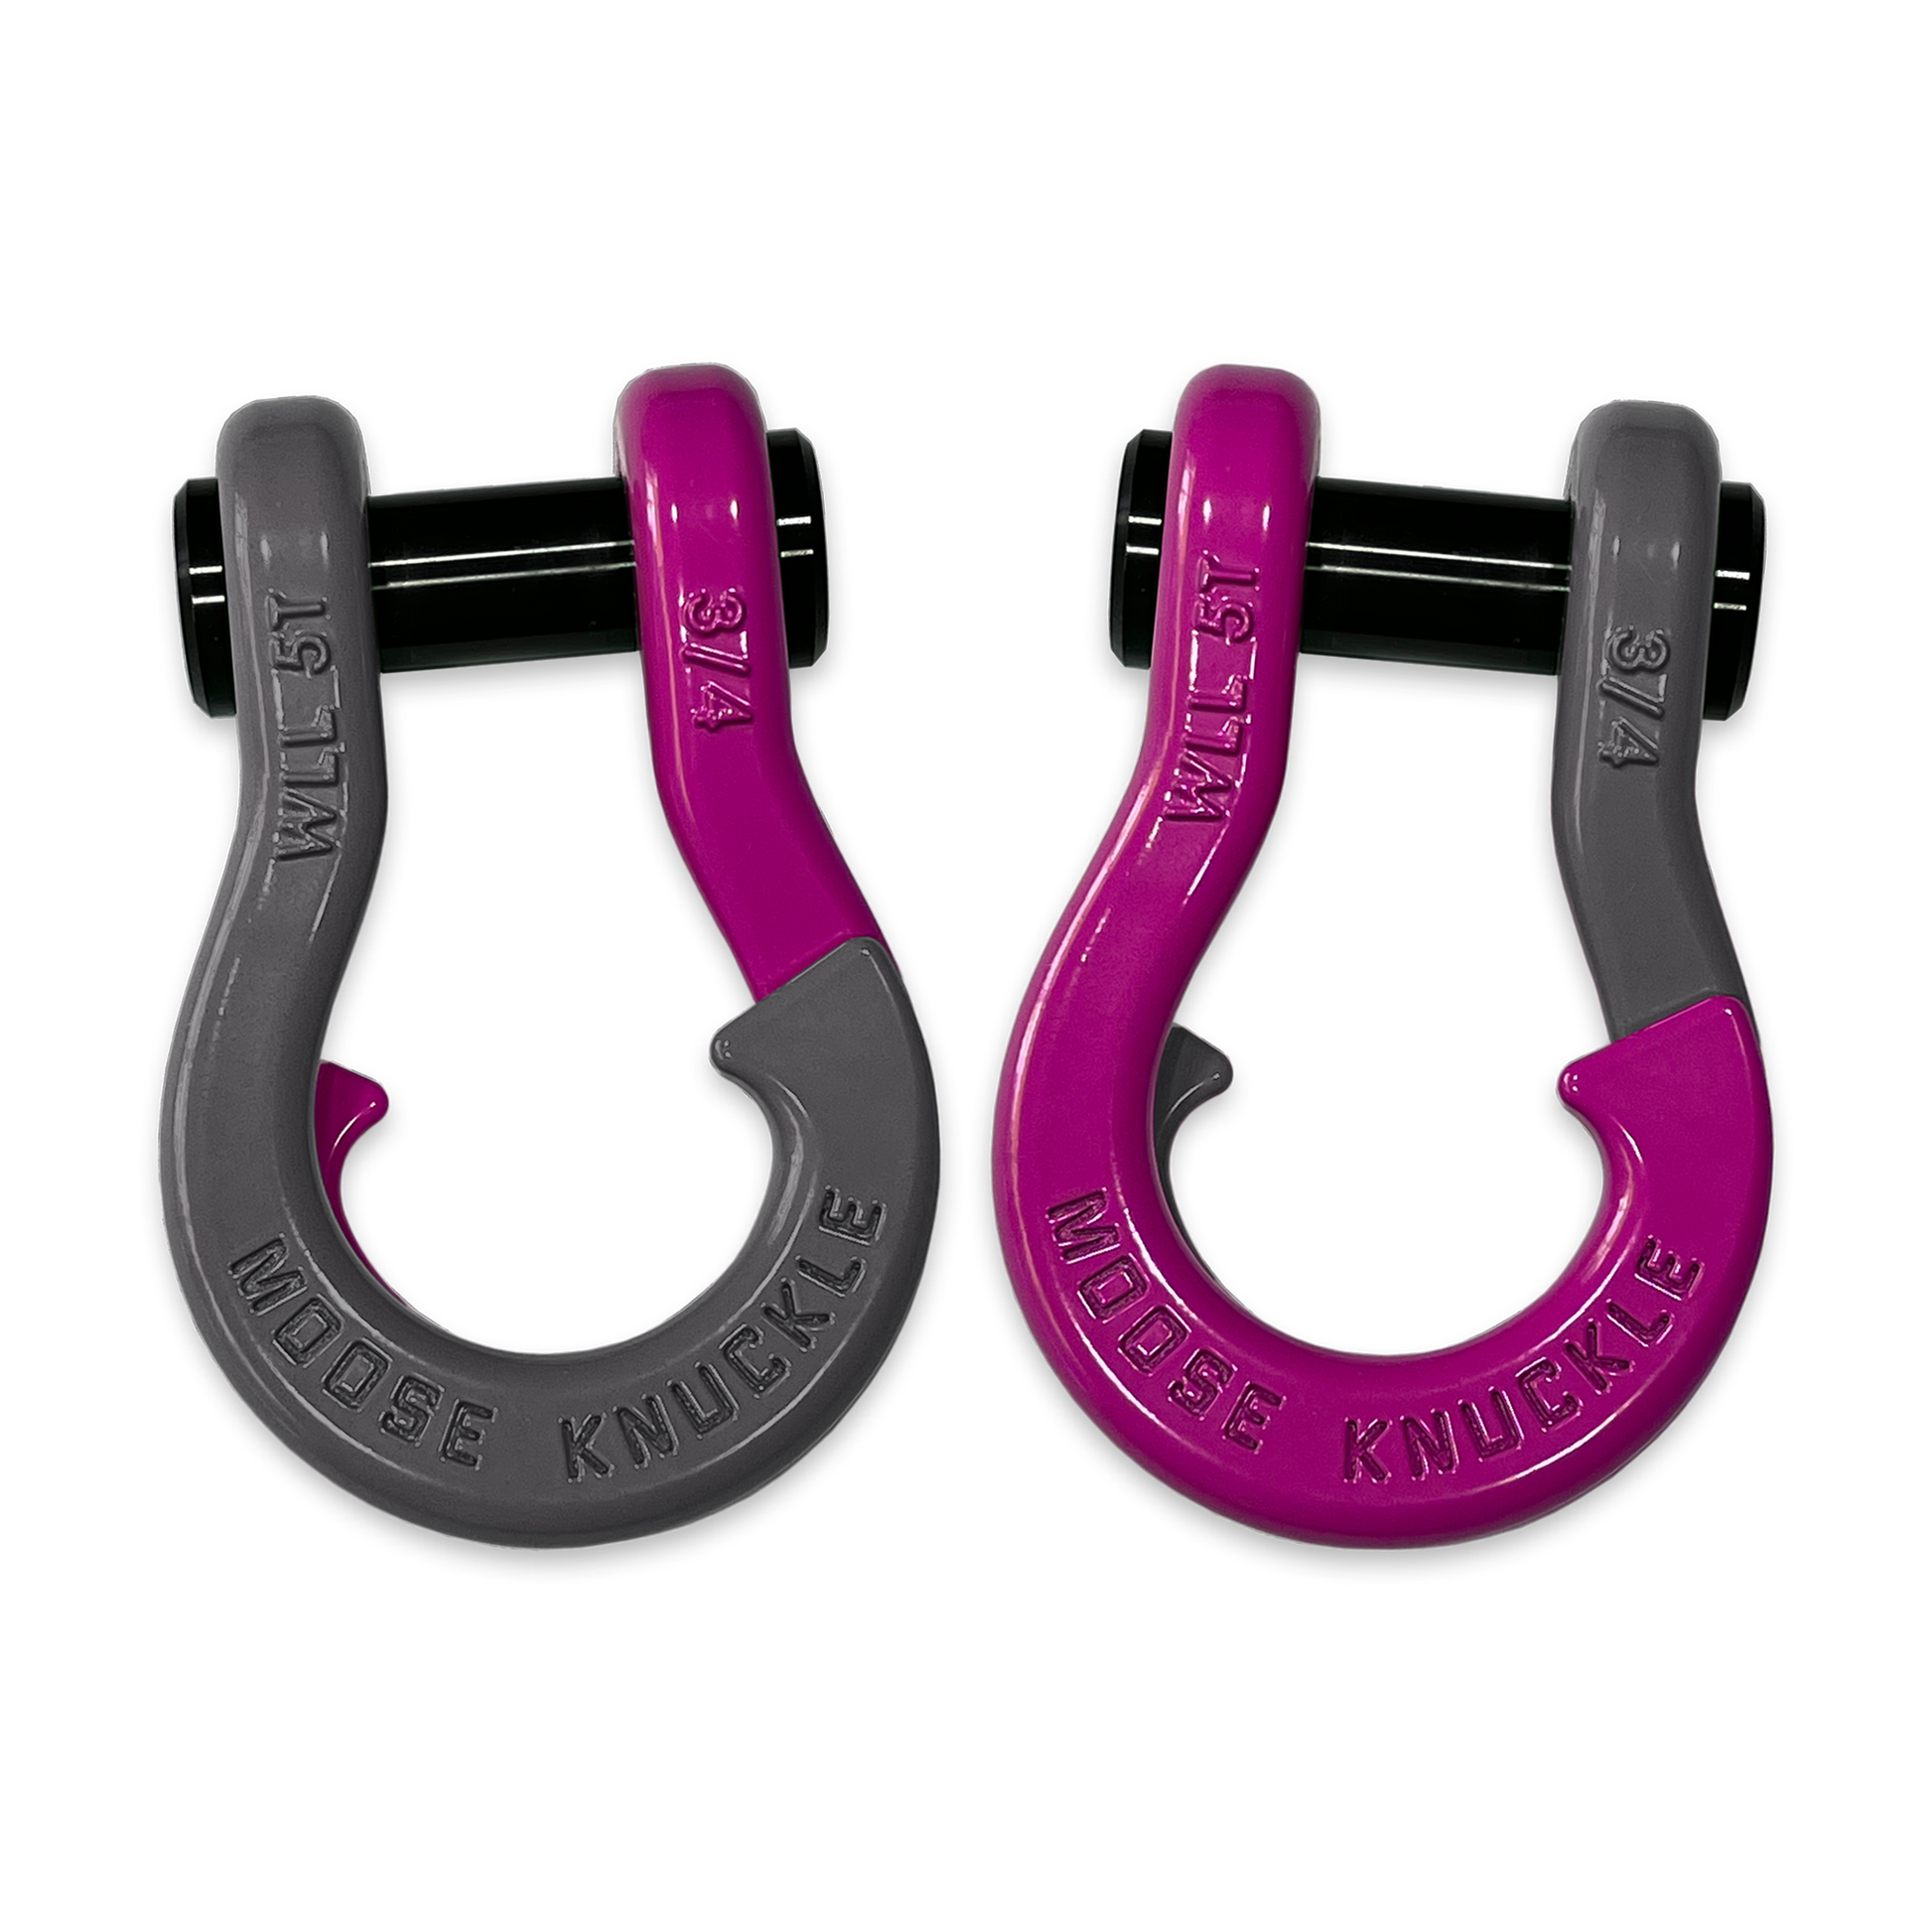 Moose Knuckle's Jowl Recovery Split Shackle 3/4 in Gun Gray and Pogo Pink Combo